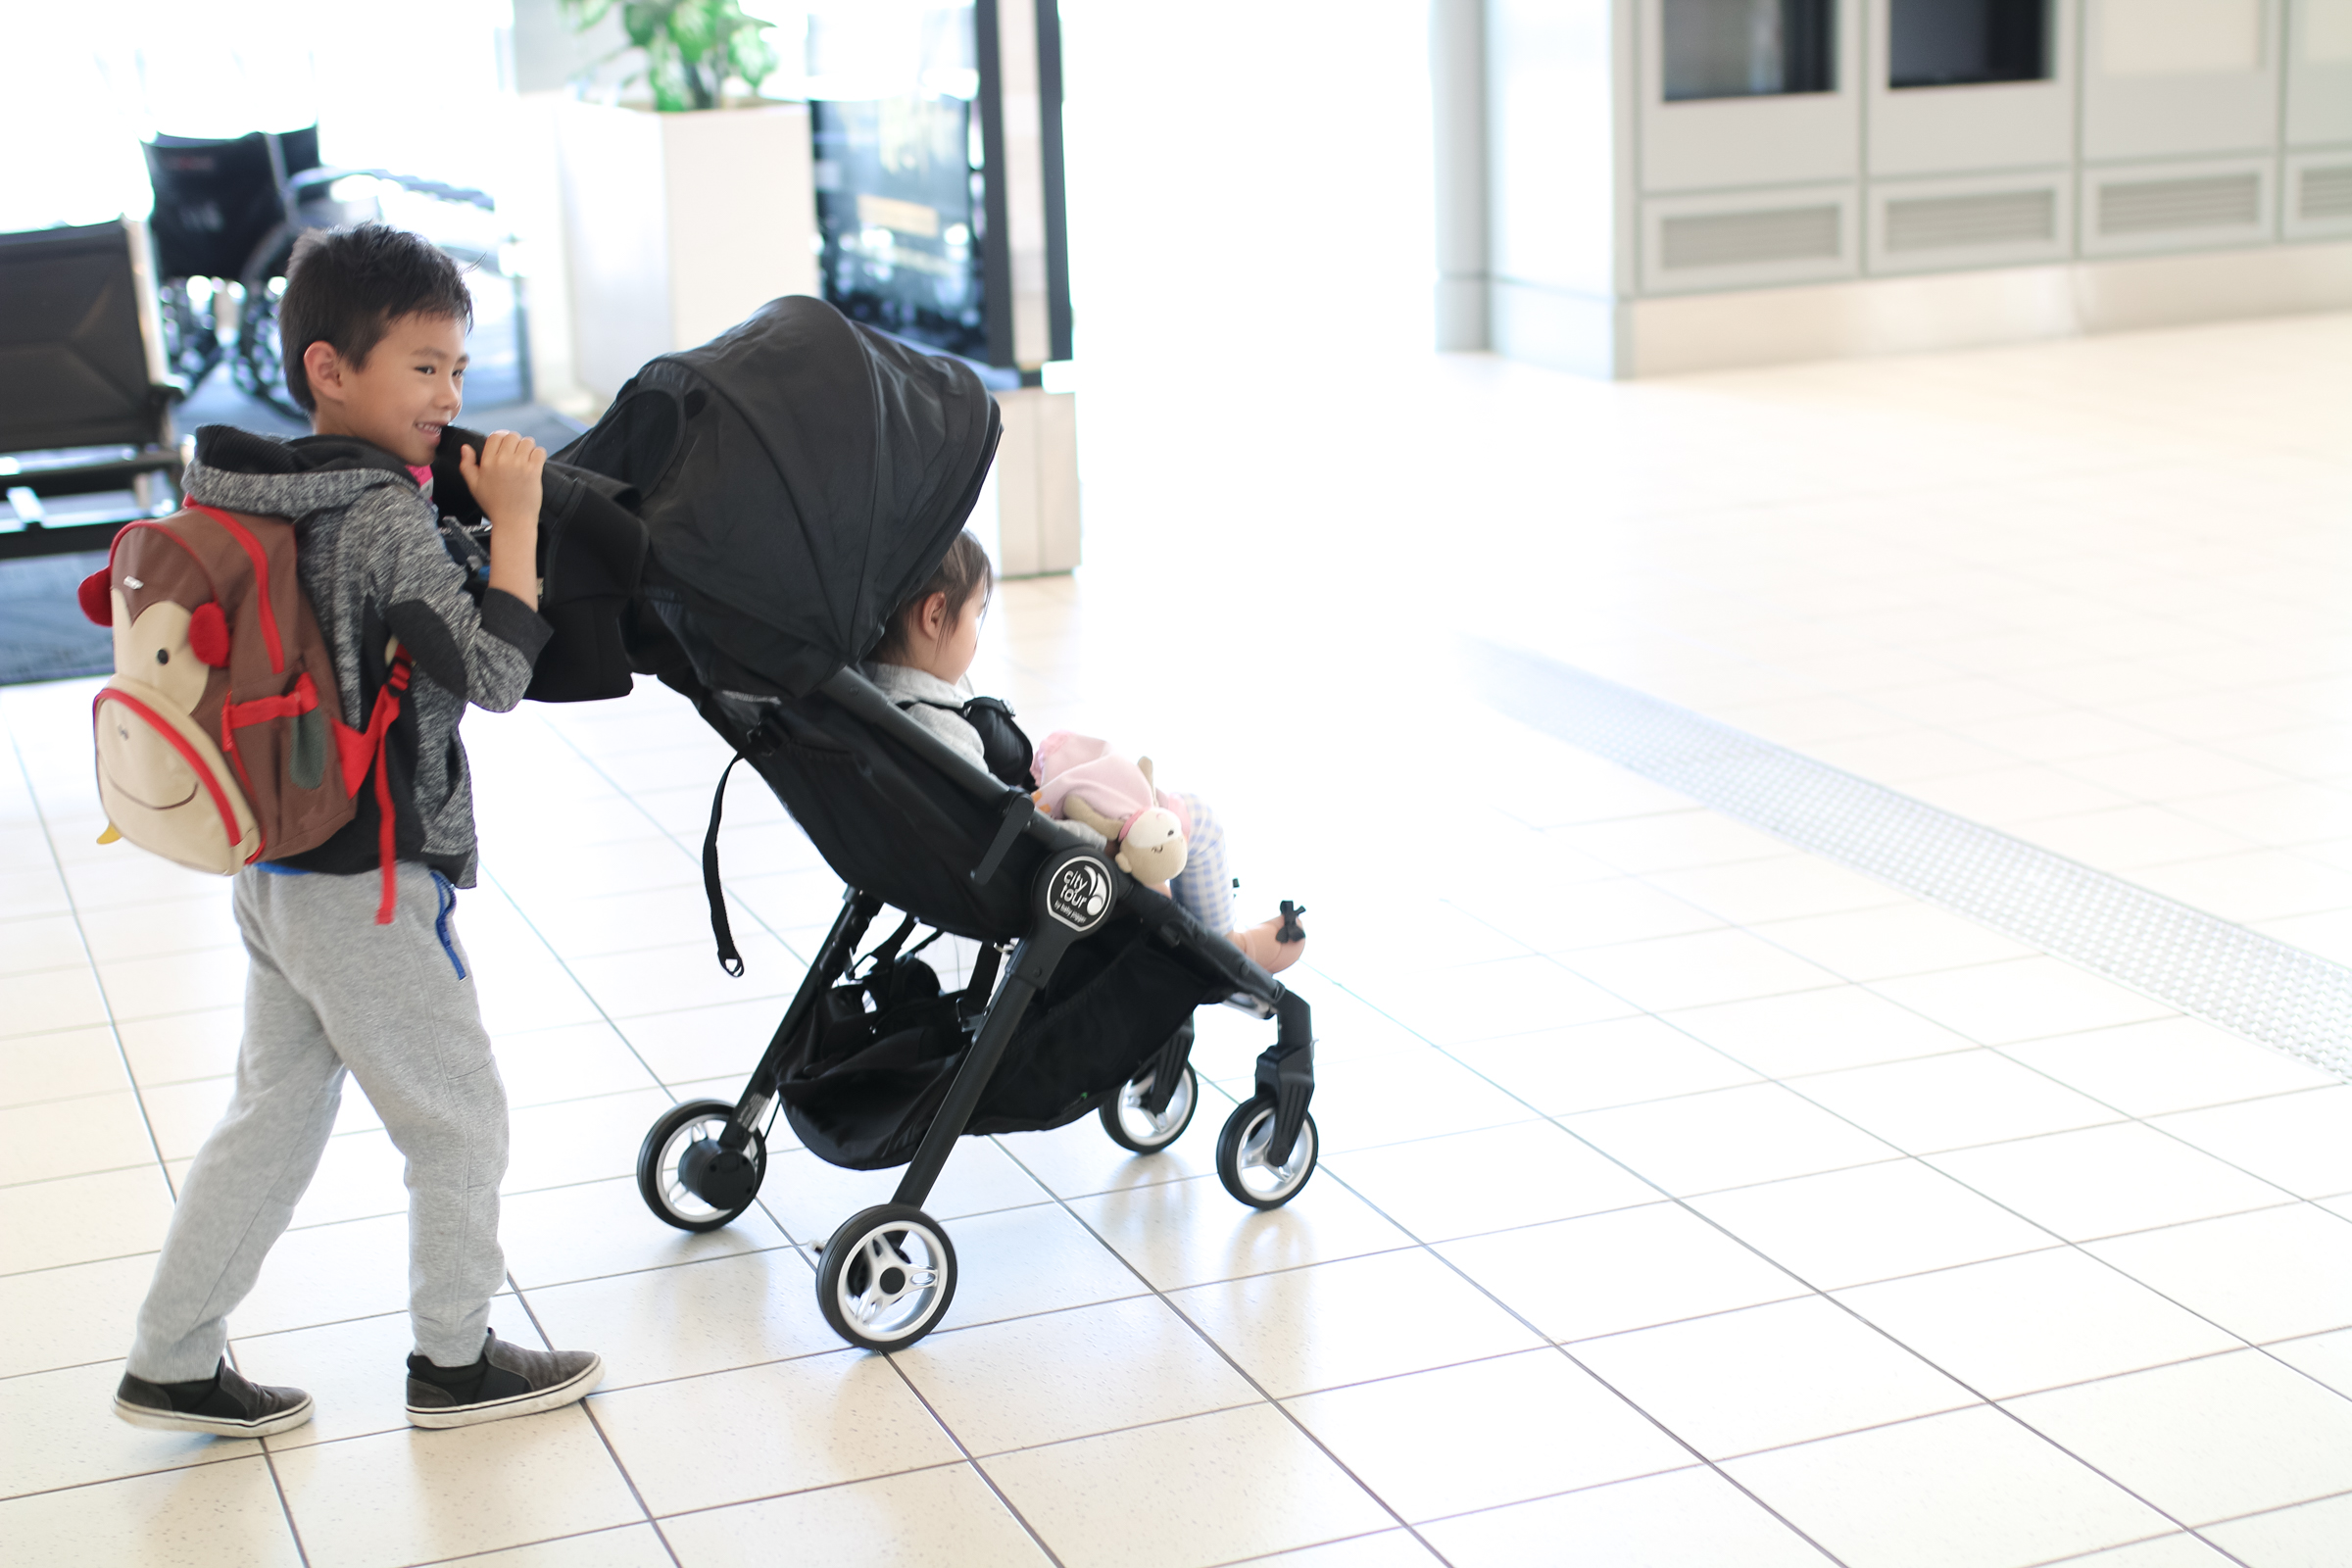 5 Travel Hacks For Traveling With Little Ones with Baby Jogger by lifestyle blogger Sandy A La Mode